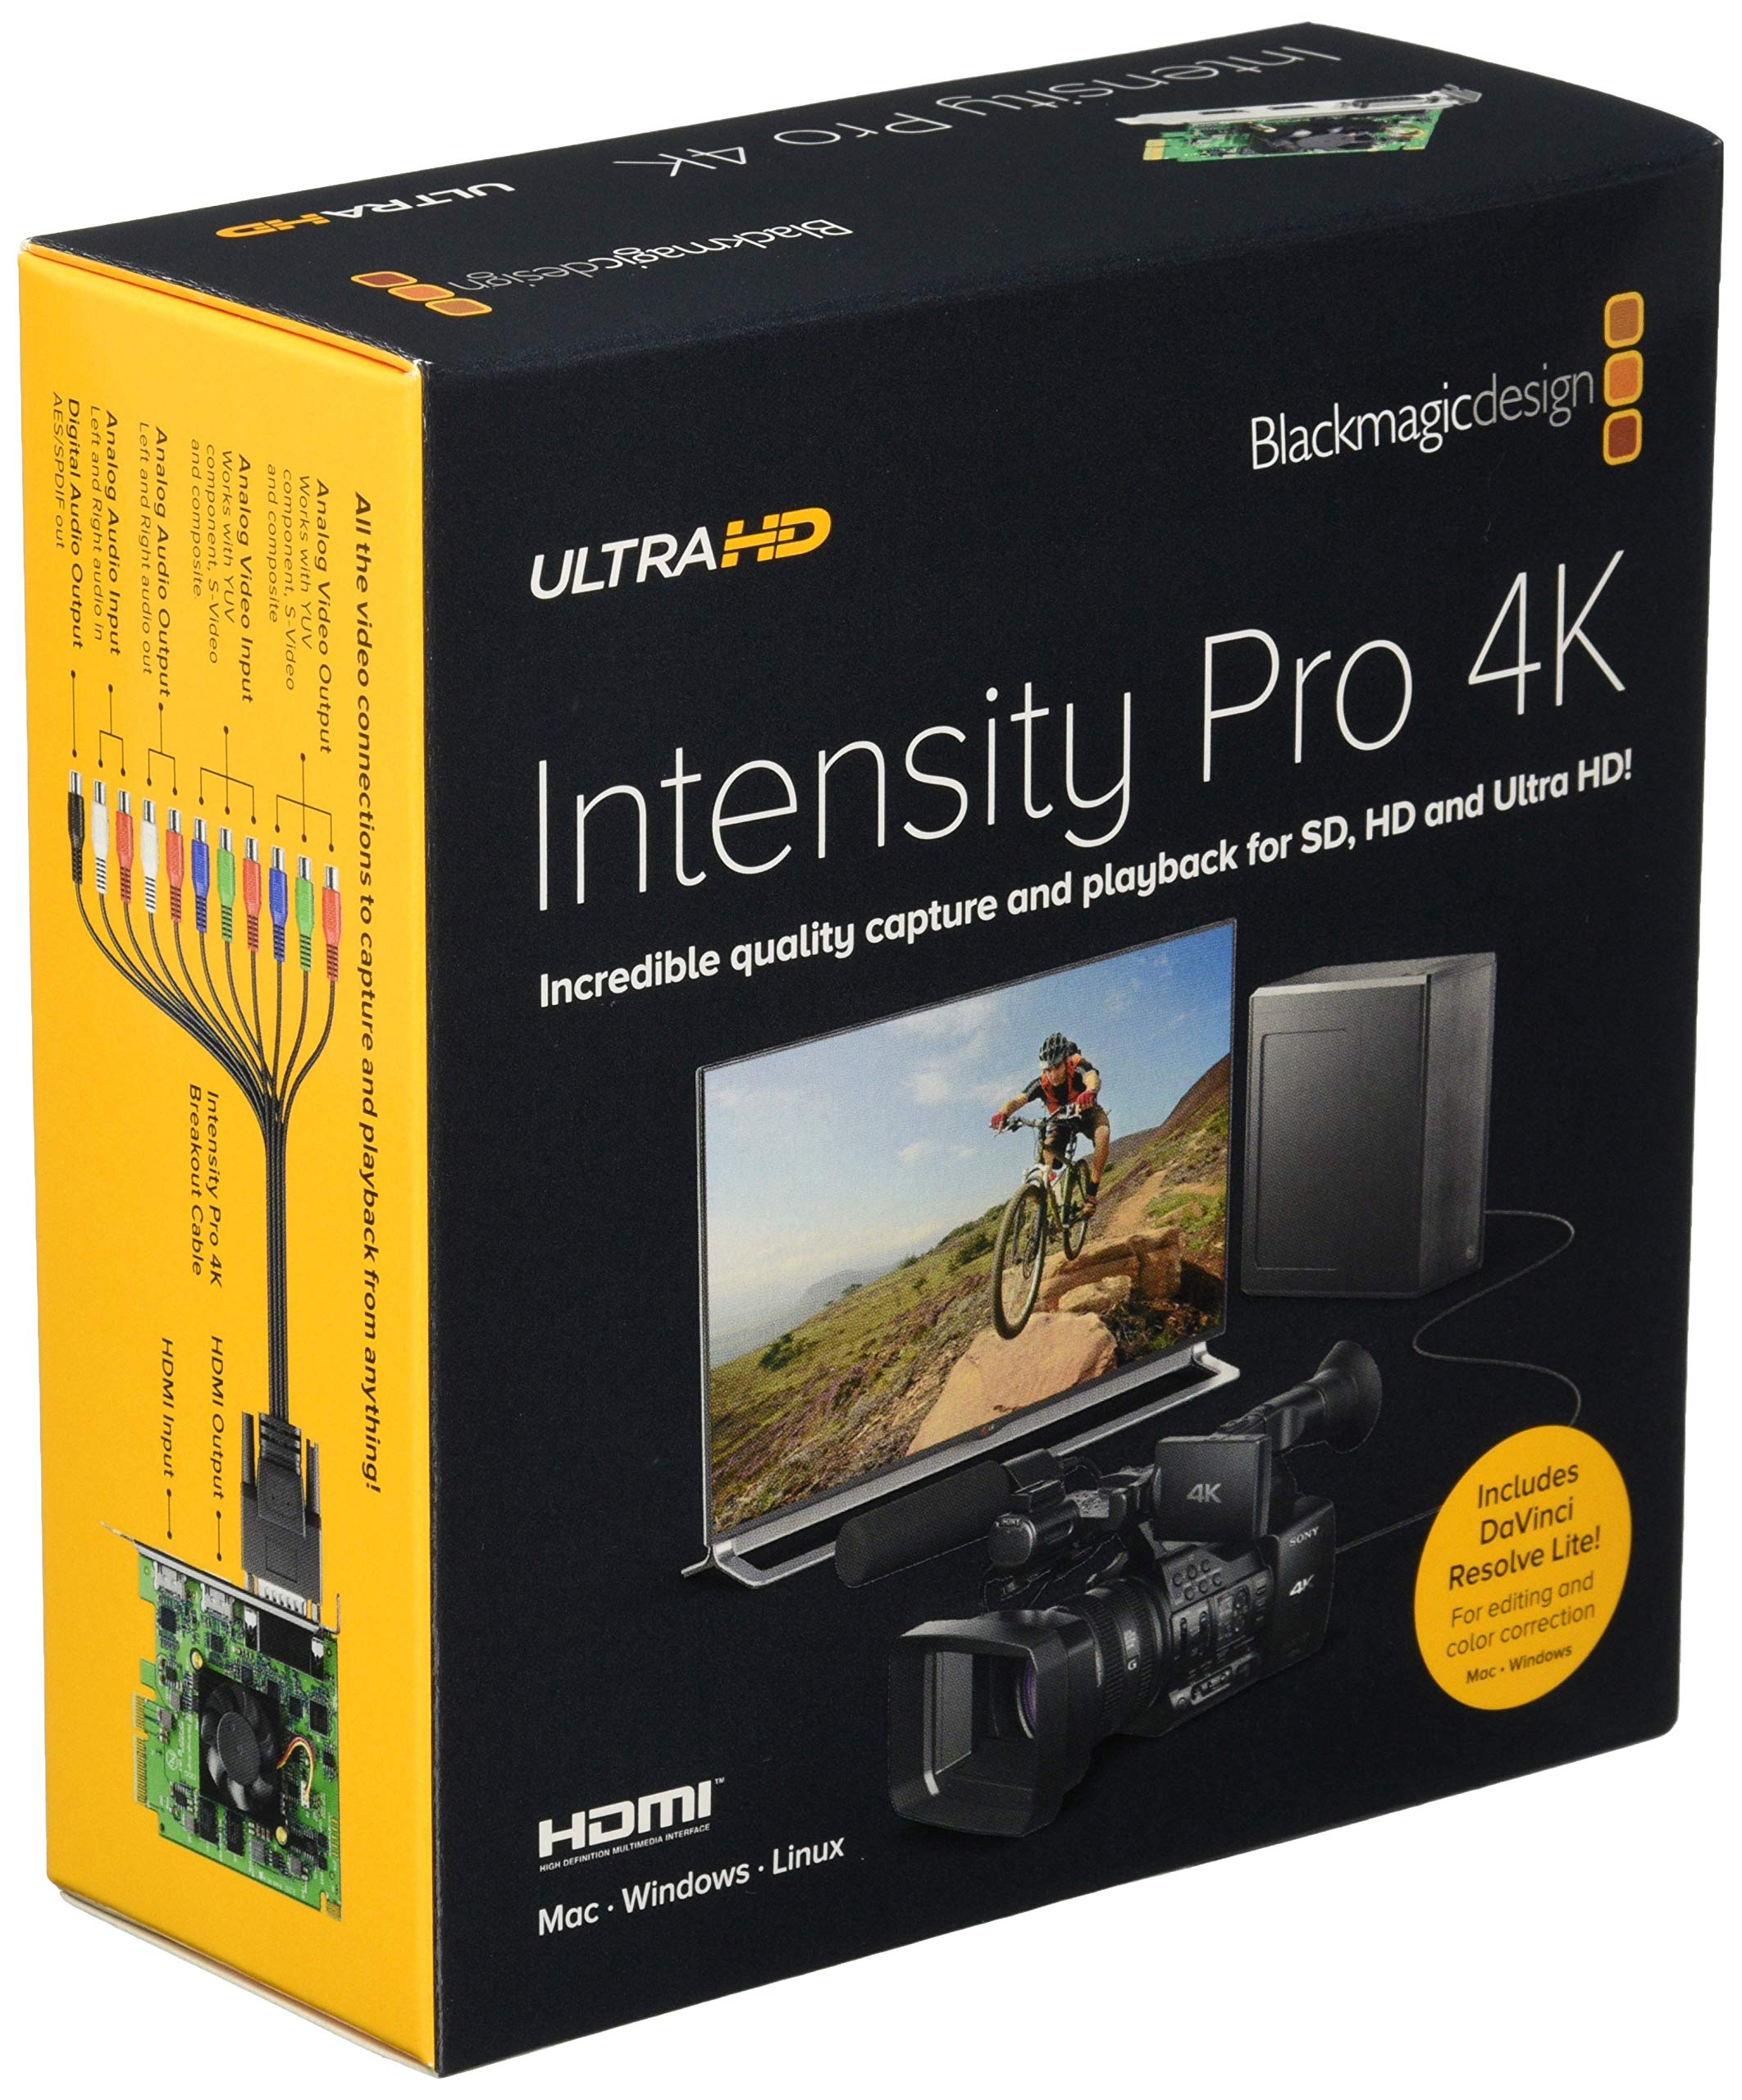 Blackmagic Design Intensity Pro 4K Capture & Playback Input/Output Card, Ultra HD at 30fps and 1080p at 60fps